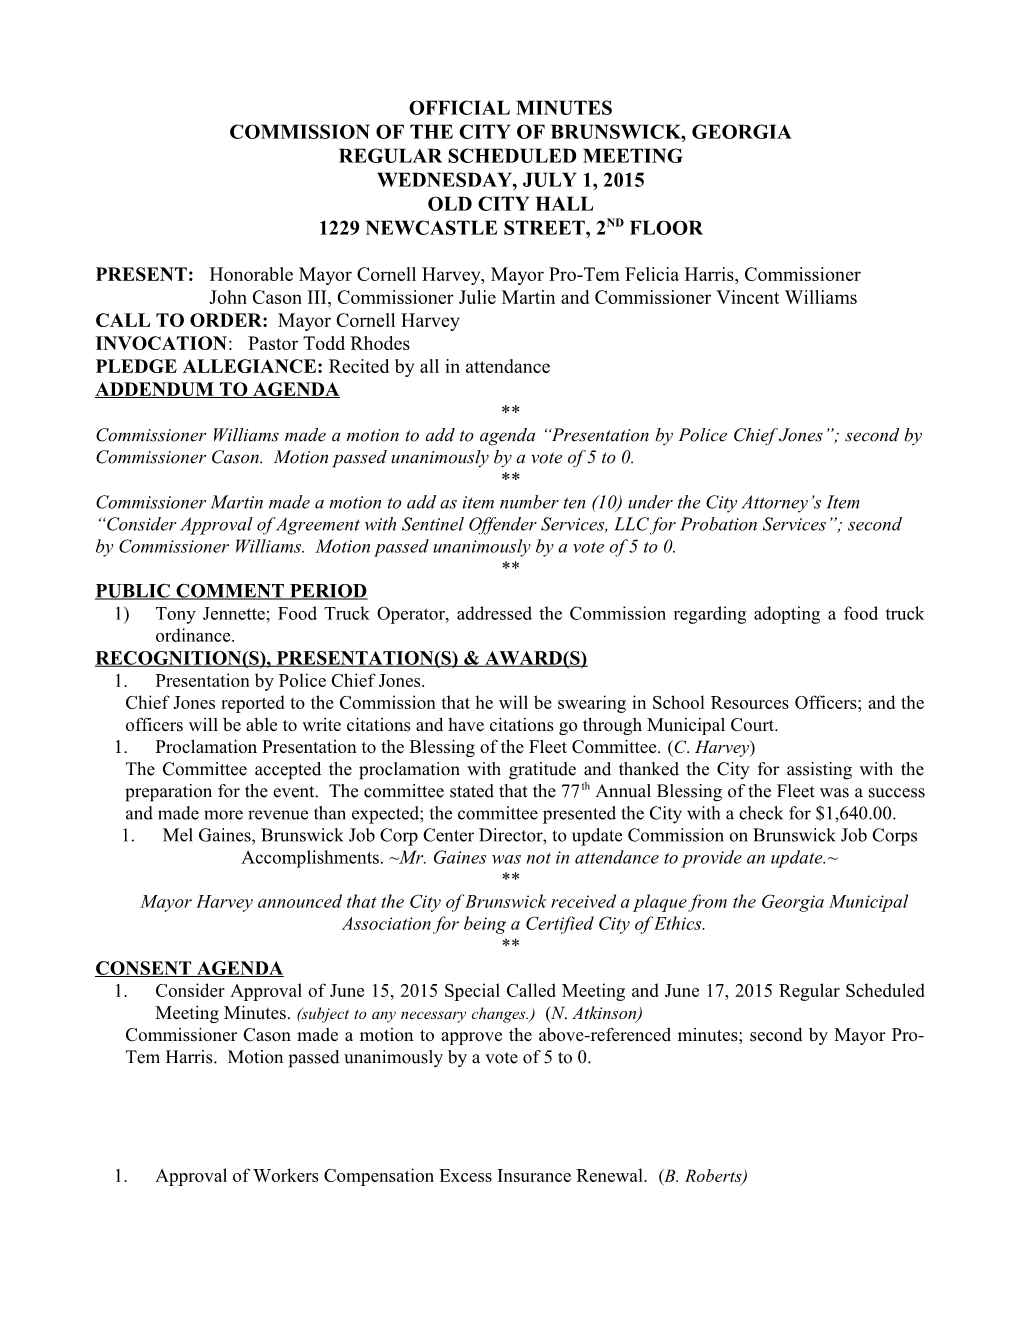 Official Minutes Commission of the City of Brunswick, Georgia Regular Scheduled Meeting